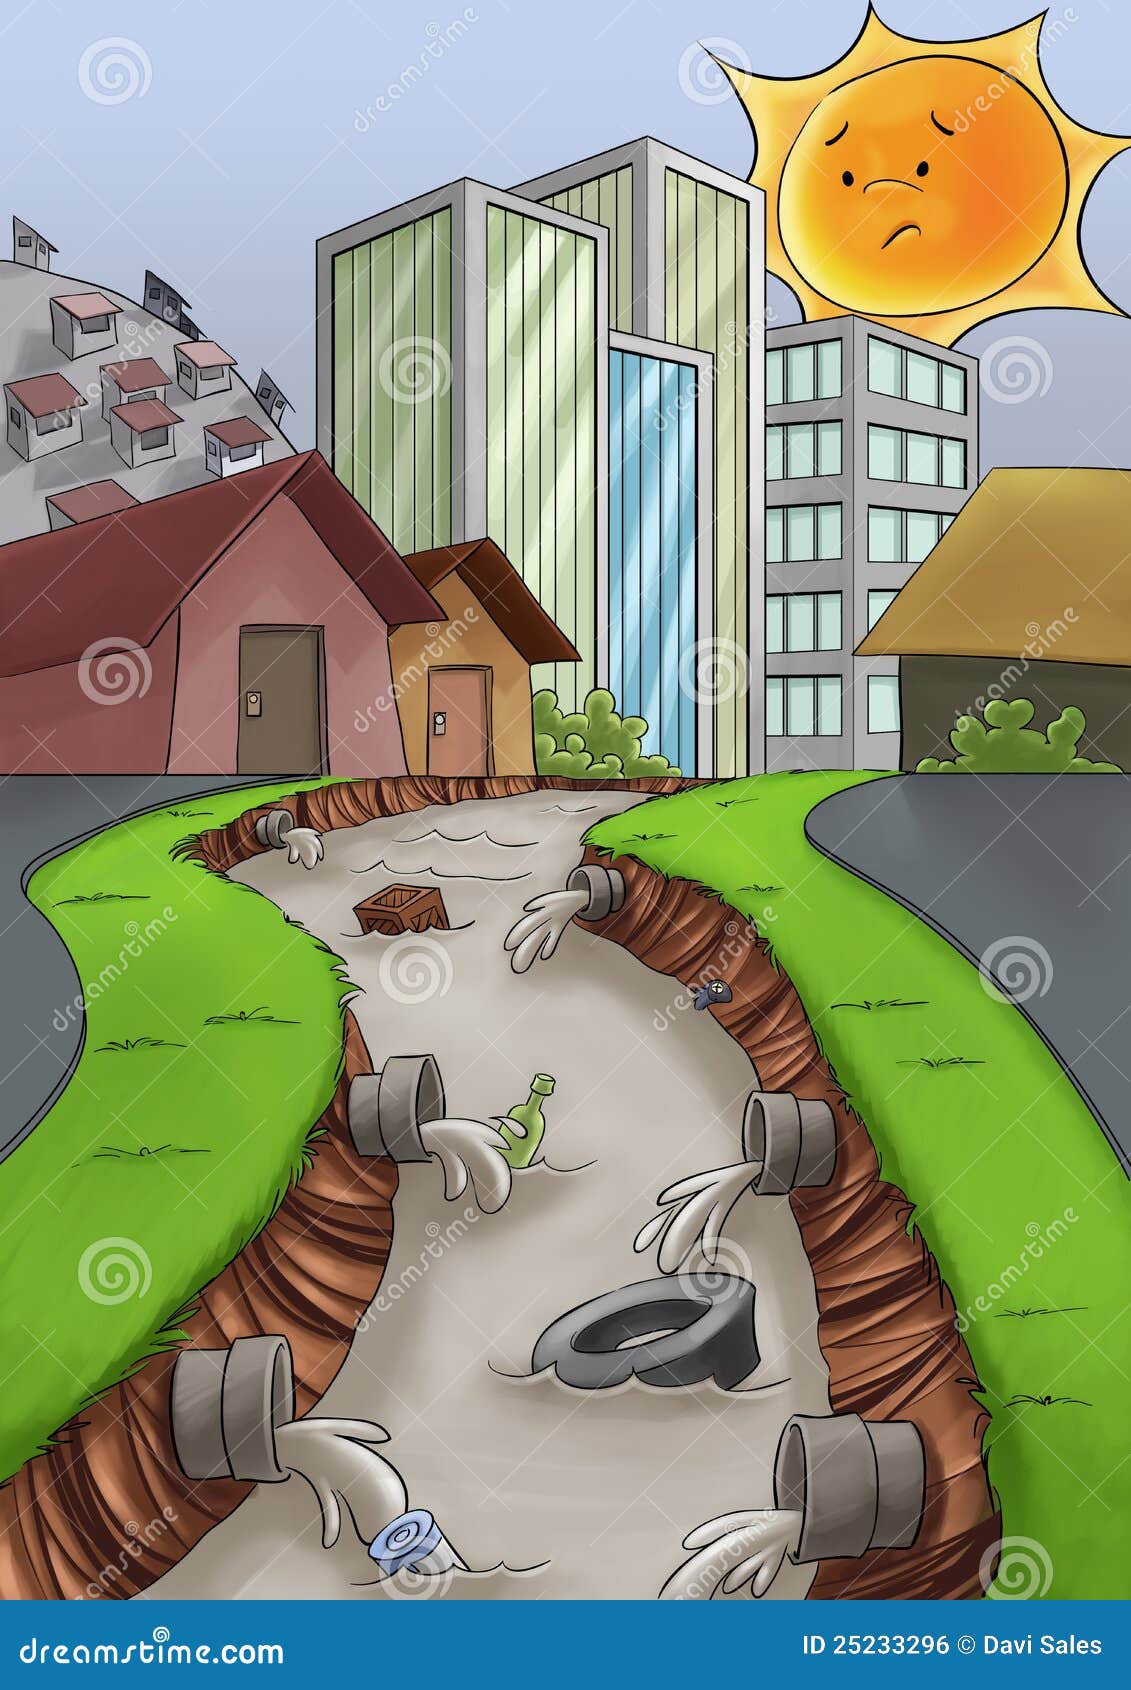 Environmental pollution drawing images Stock Photos - Page 1 : Masterfile